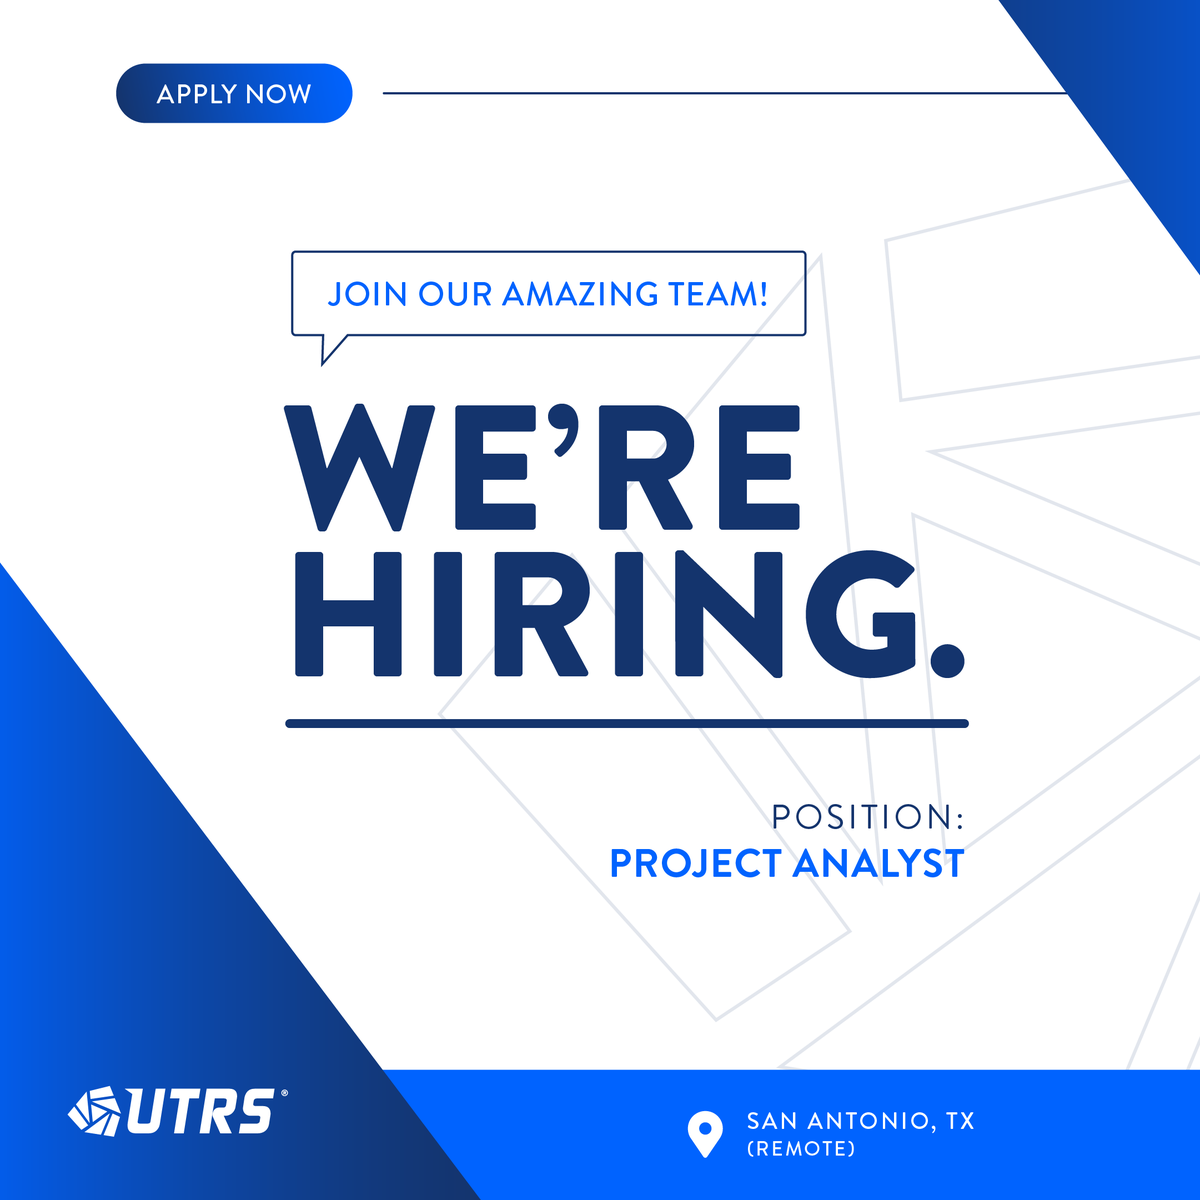 Are you a Project Analyst interested in working for a forward-thinking company? Are you ready to take on new challenges? Then we want you on the UTRS Team! Check out our job openings and apply today: bit.ly/3Jz0b1u #jobsearch #TXjobs #UTRS #analyst